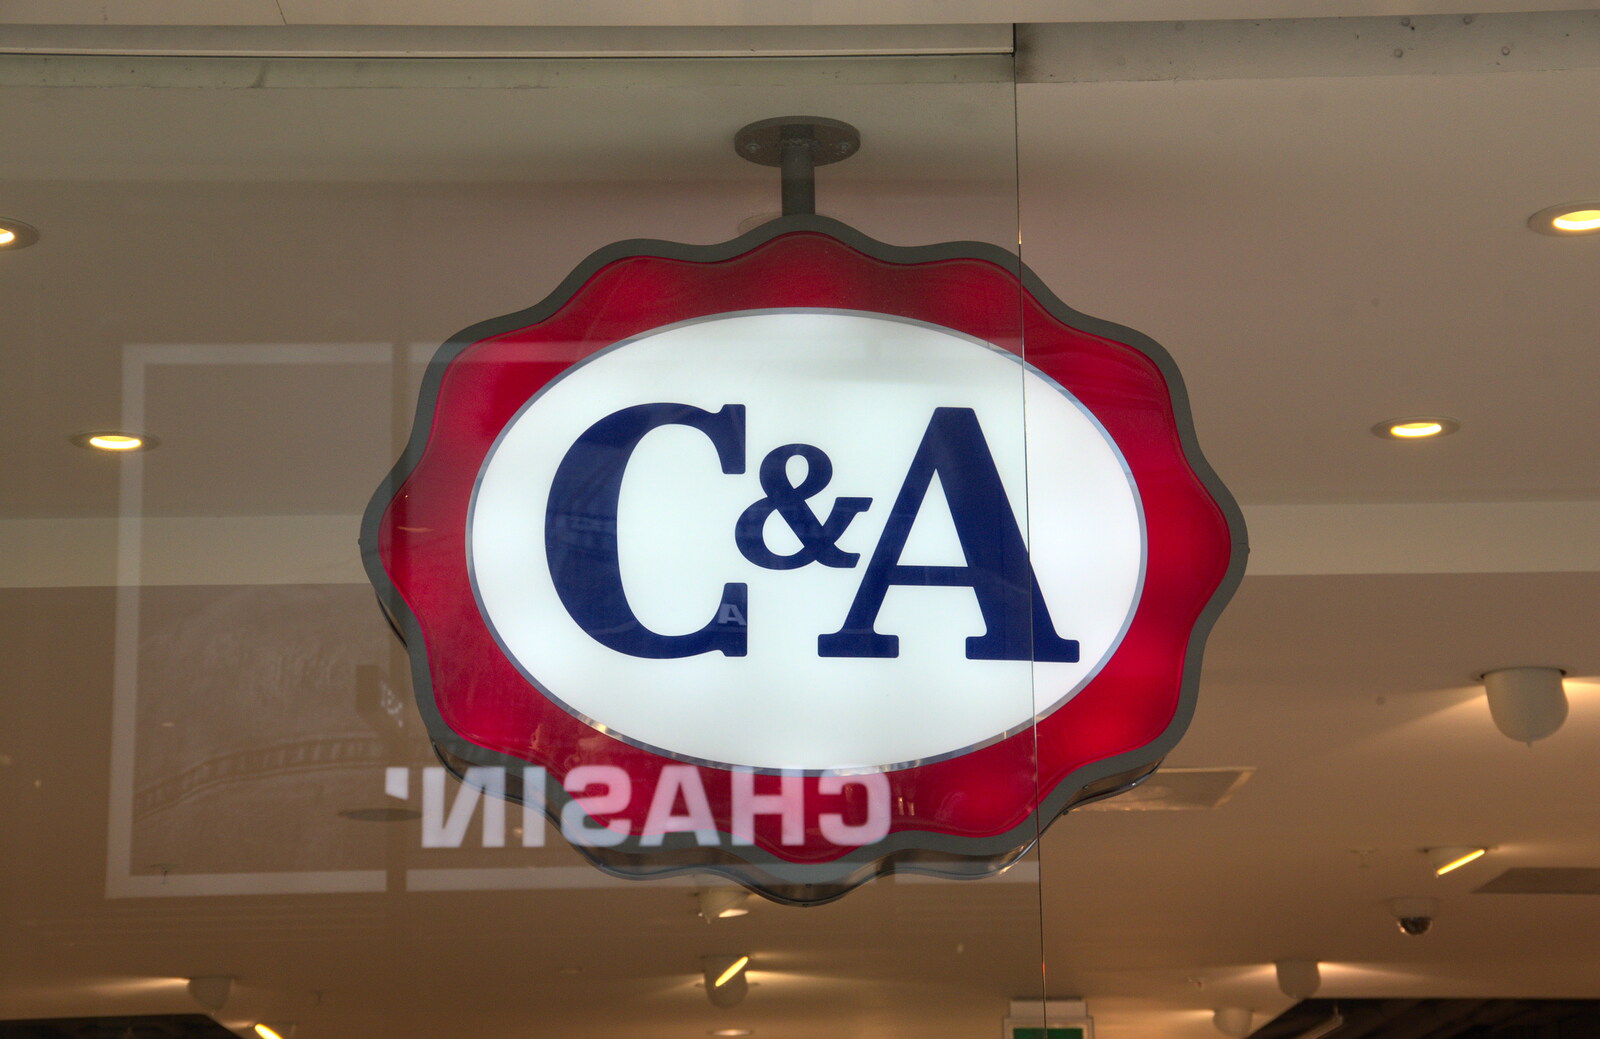 Old UK high-street name C&A lives on from A Postcard from Utrecht, Nederlands - 10th June 2018